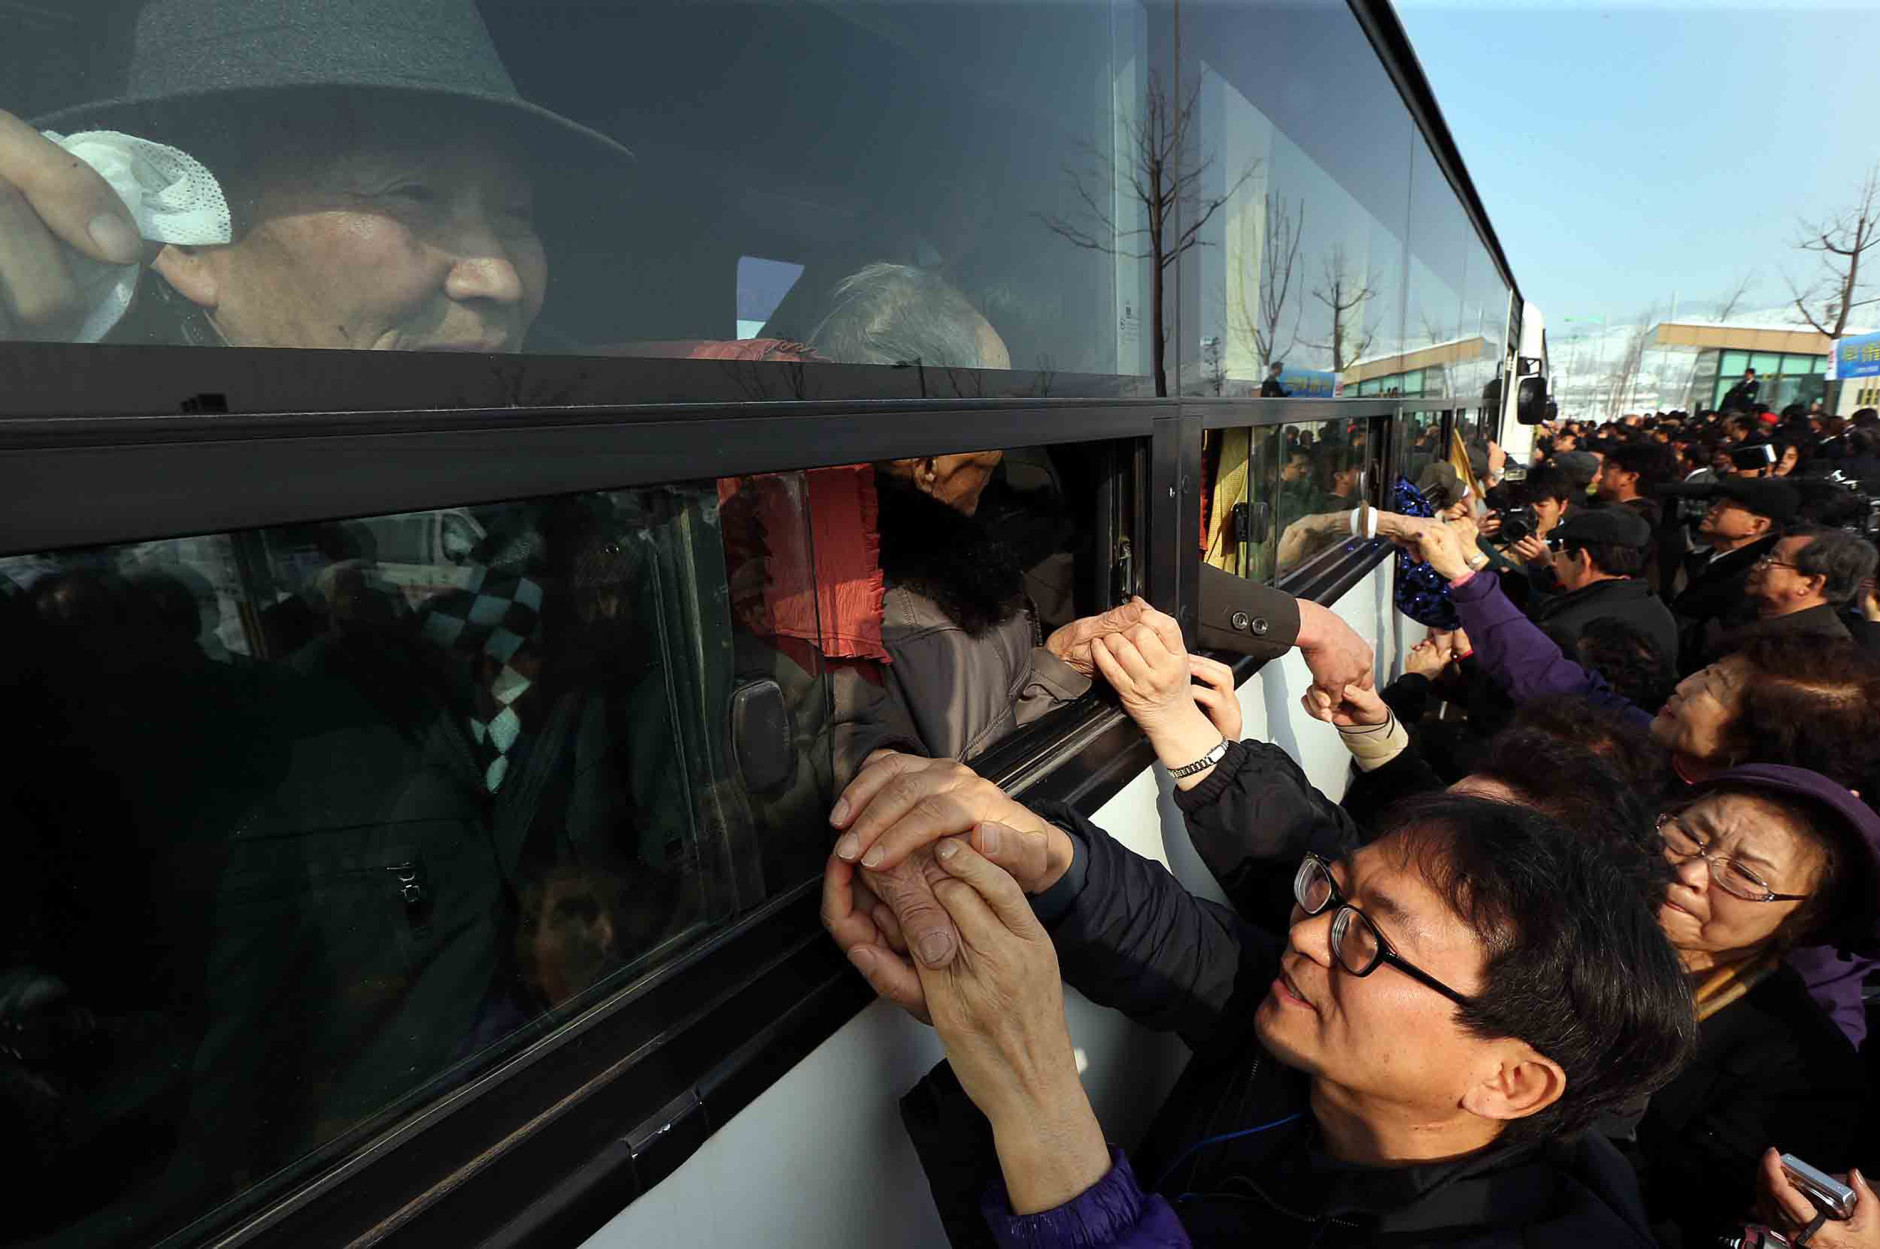 FOR USE AS DESIRED, YEAR END PHOTOS - FILE - South Koreans hold their North Korean relative's hands on a bus after the Separated Family Reunion Meeting at Diamond Mountain in North Korea, Tuesday, Feb. 25, 2014. The first reunions of North and South Koreans in more than three years have were held in North Korea. The final group of Koreans to participate in reunions ends Tuesday. (AP Photo/Yonhap, Lee Ji-eun, File) KOREA OUT